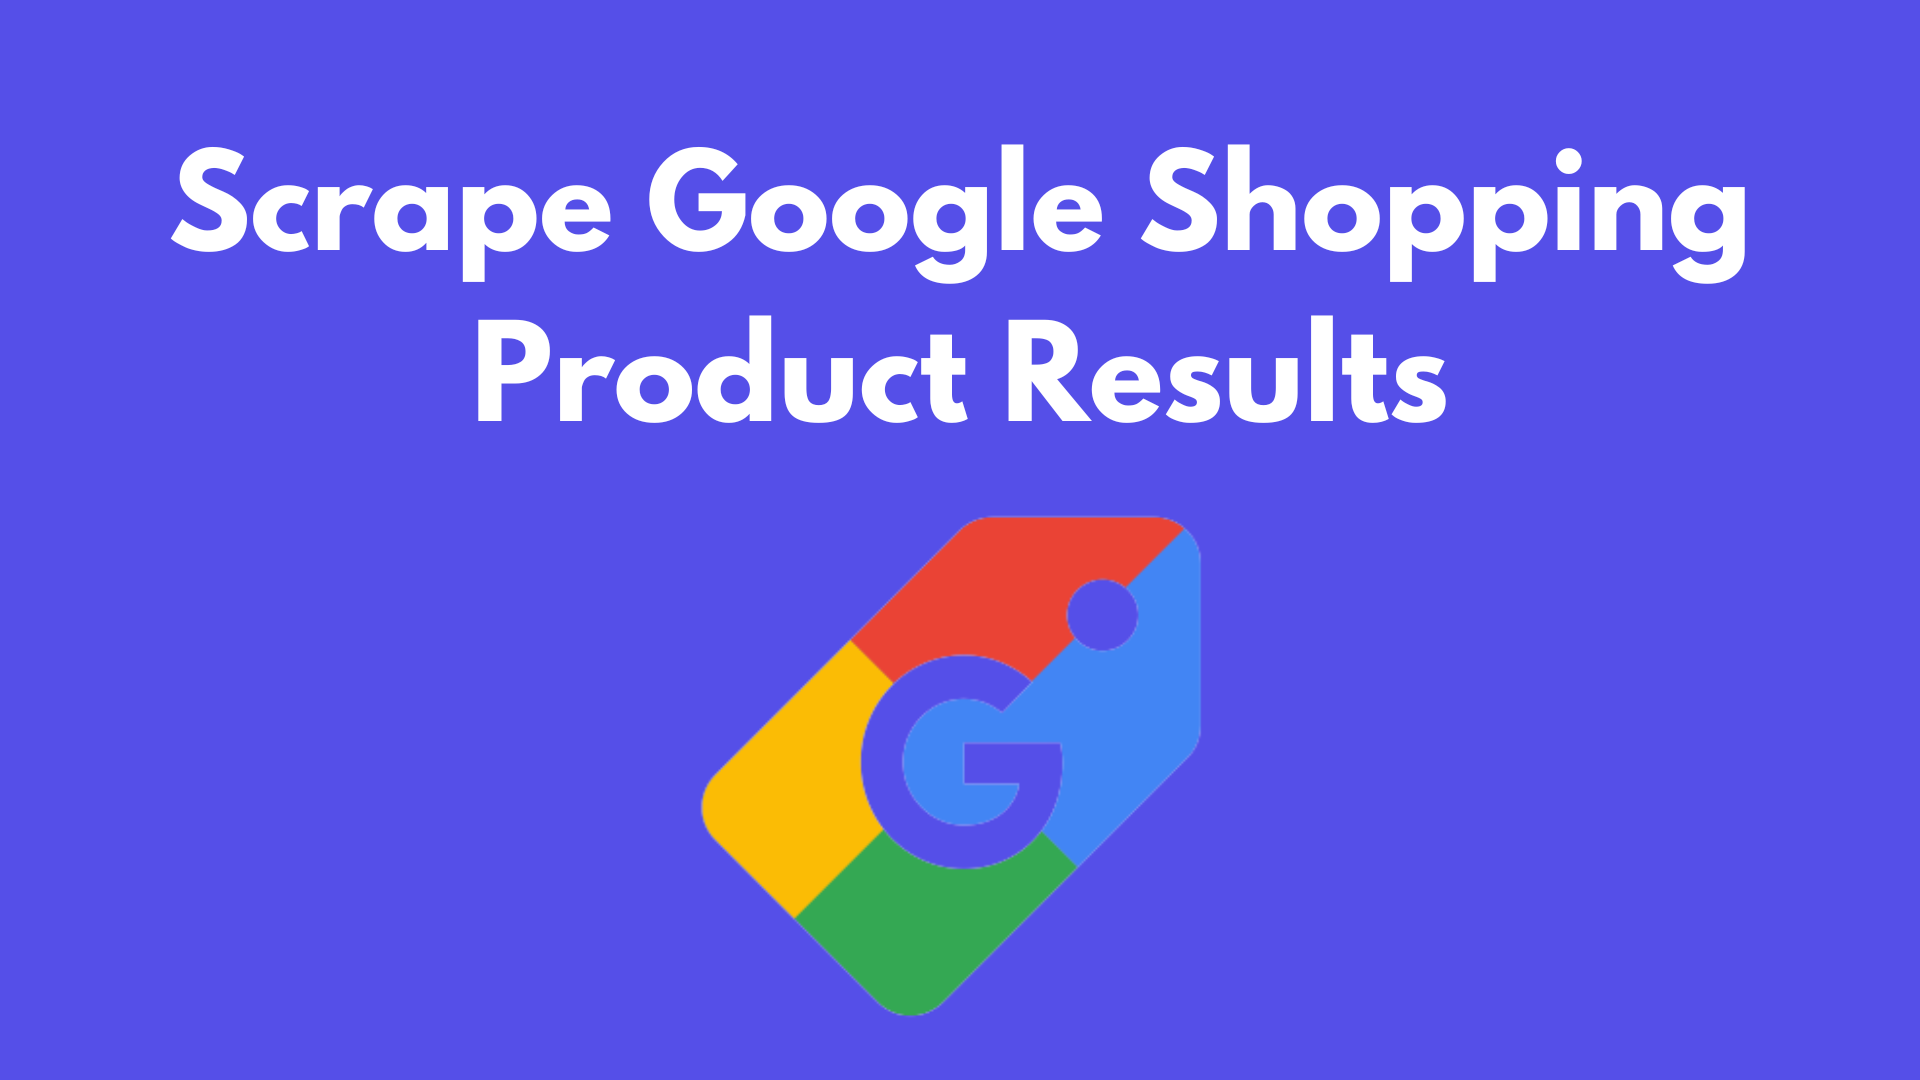 Scrape Google Shopping Product Results